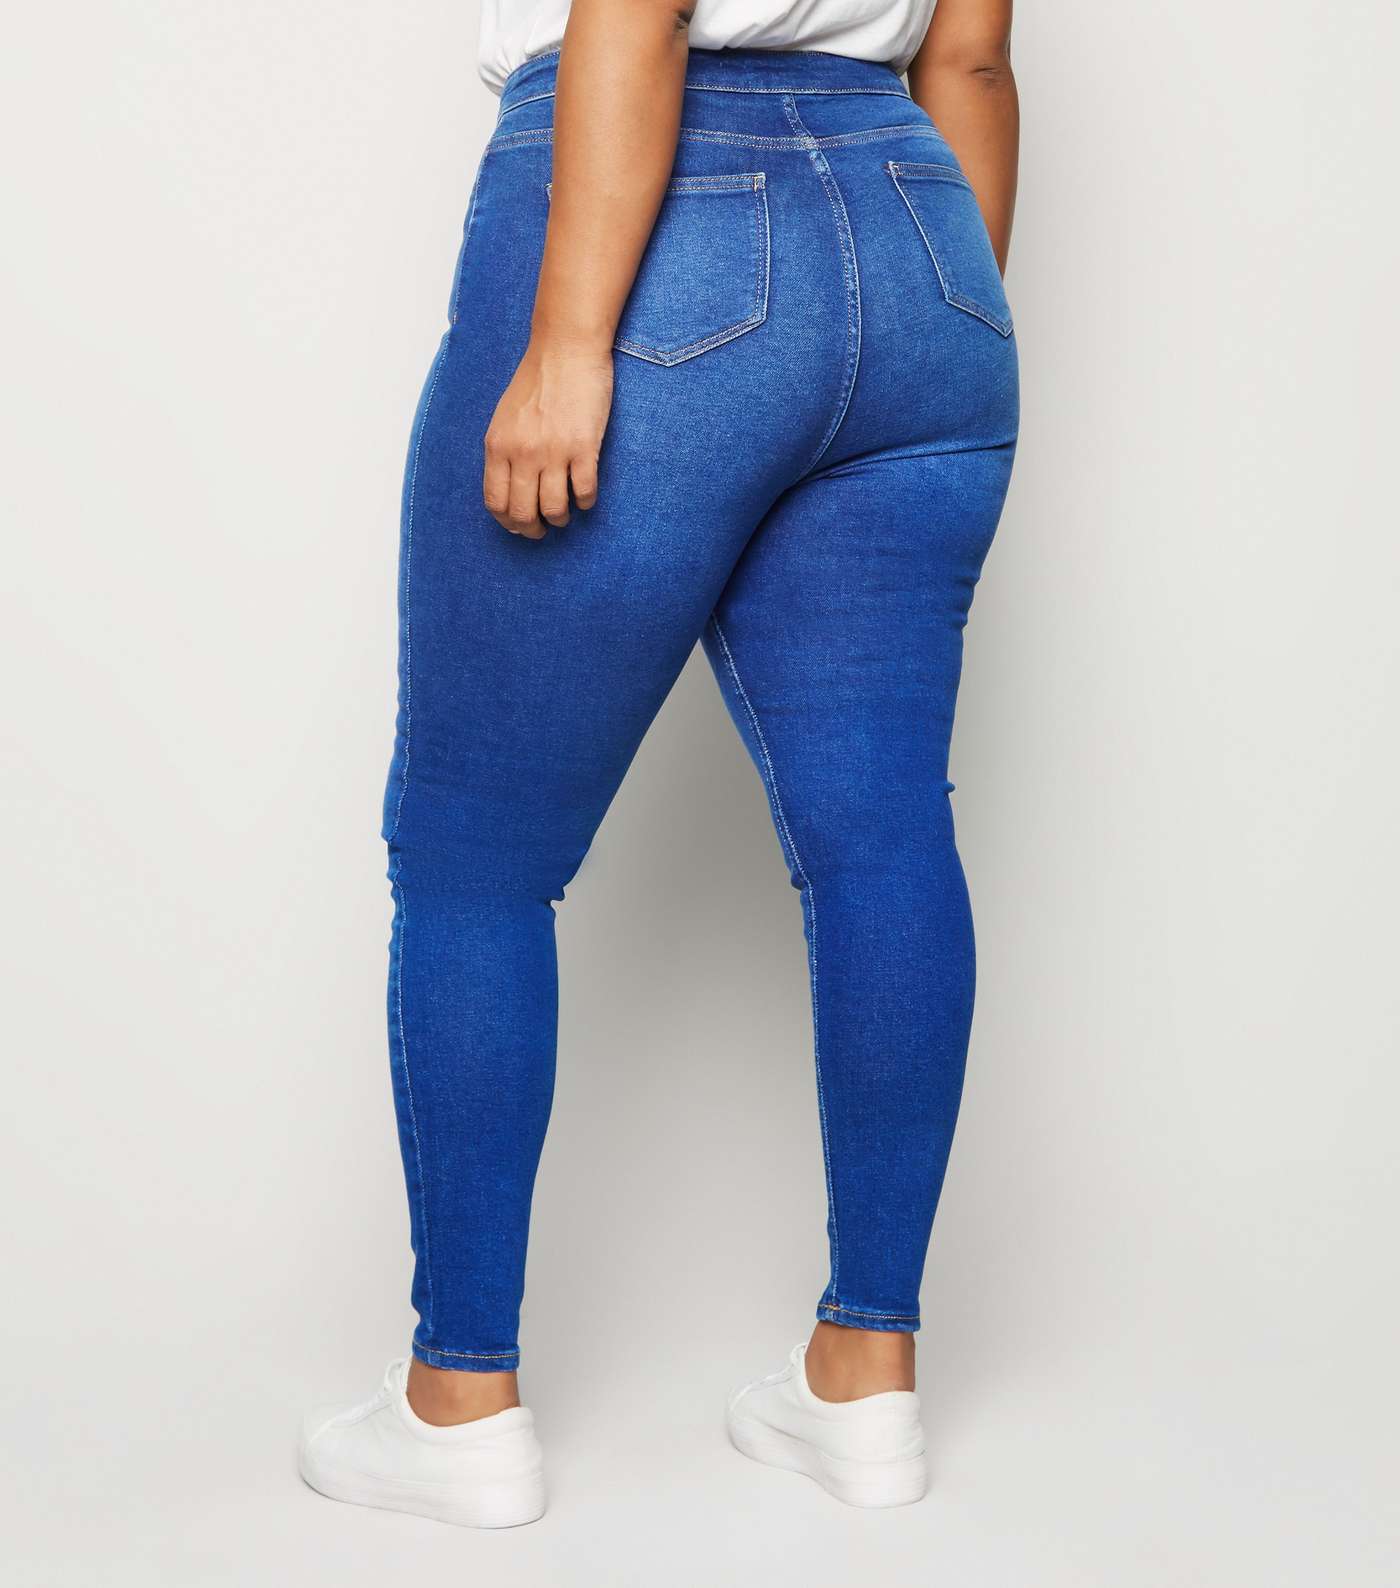 Curves Bright Blue High Waist Skinny Jeans Image 5